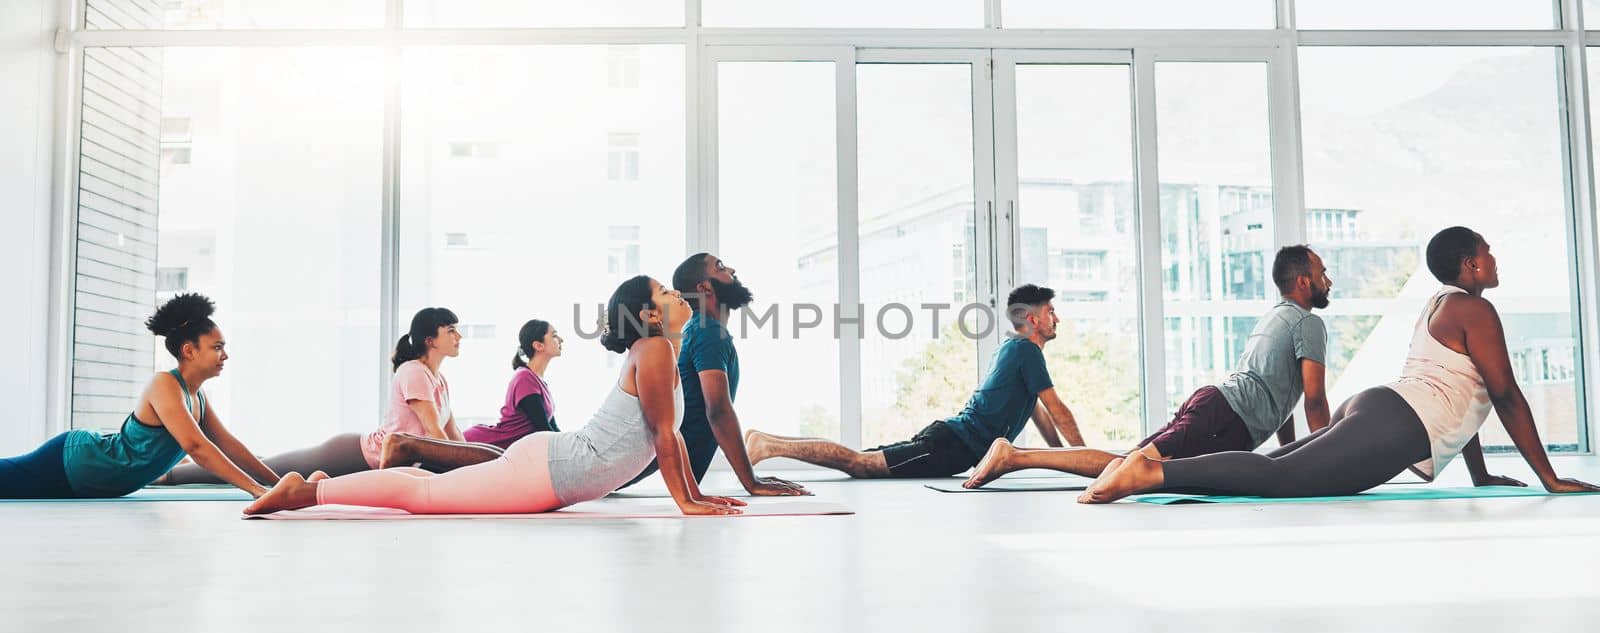 Yoga class, fitness and exercise with people together for health, diversity and wellness. Men and women in zen studio for holistic workout, mental health and body balance with cobra mockup on ground.